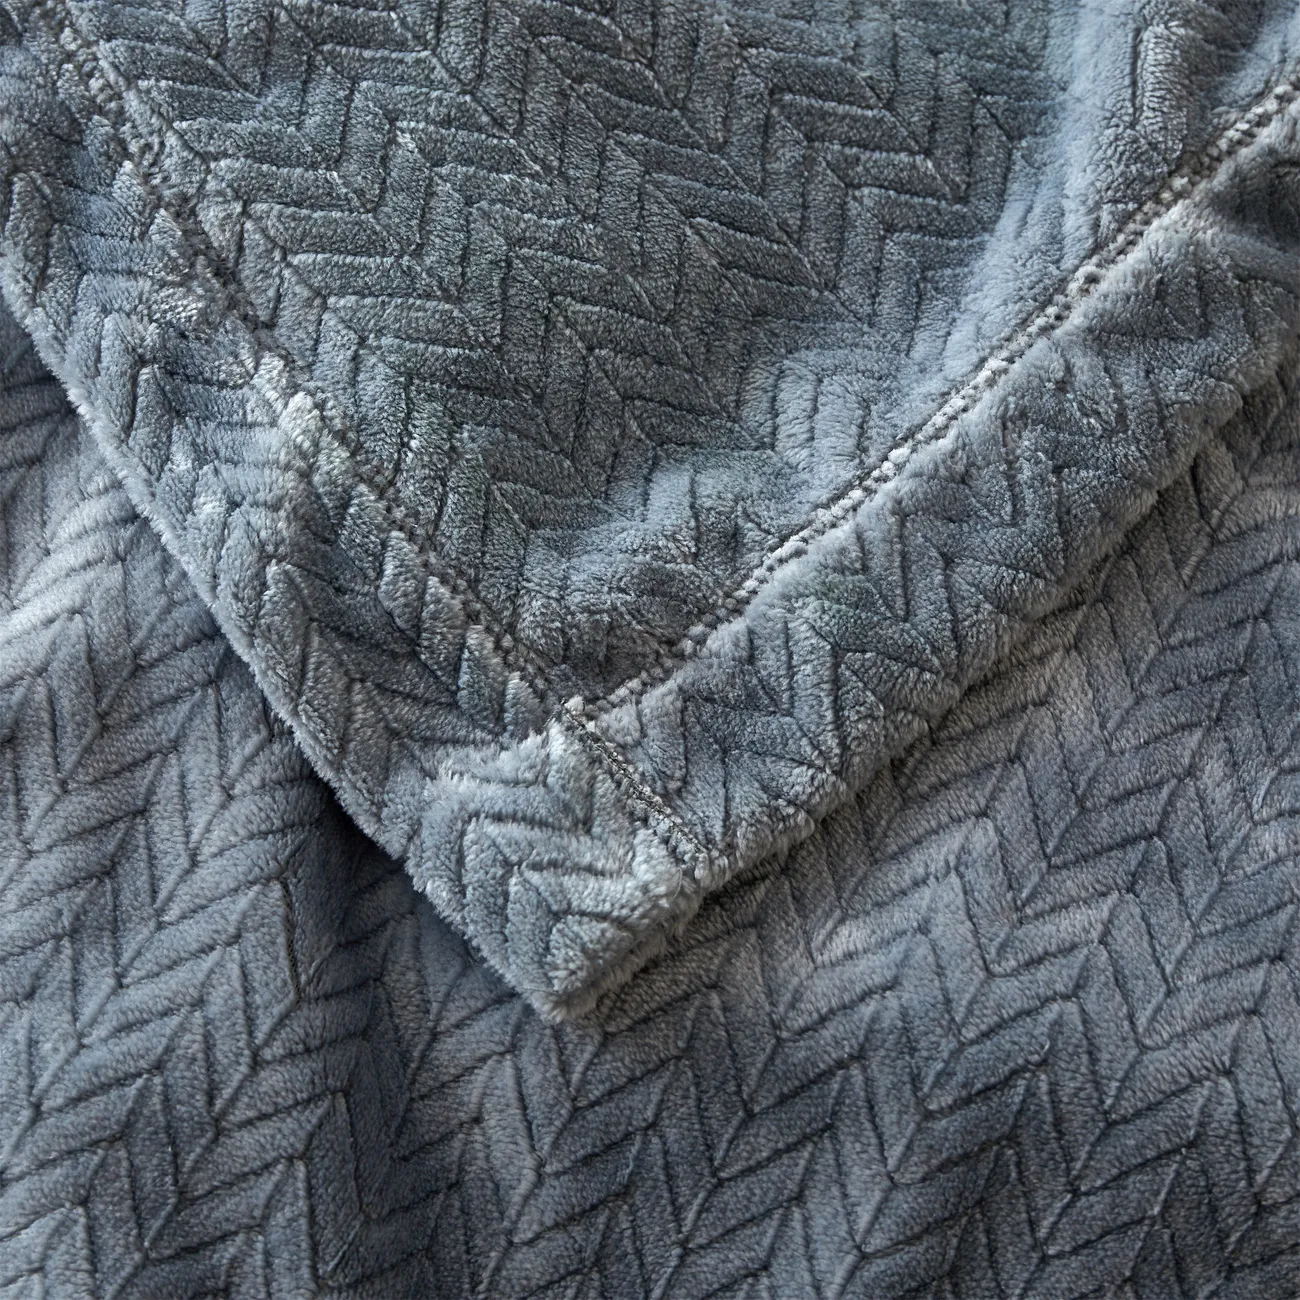 Solid Color Modern and Simple Style Blanket - 150cm x 200cm Size, Warm, Comfortable, and Skin-Friendly Bluish Grey big image 1